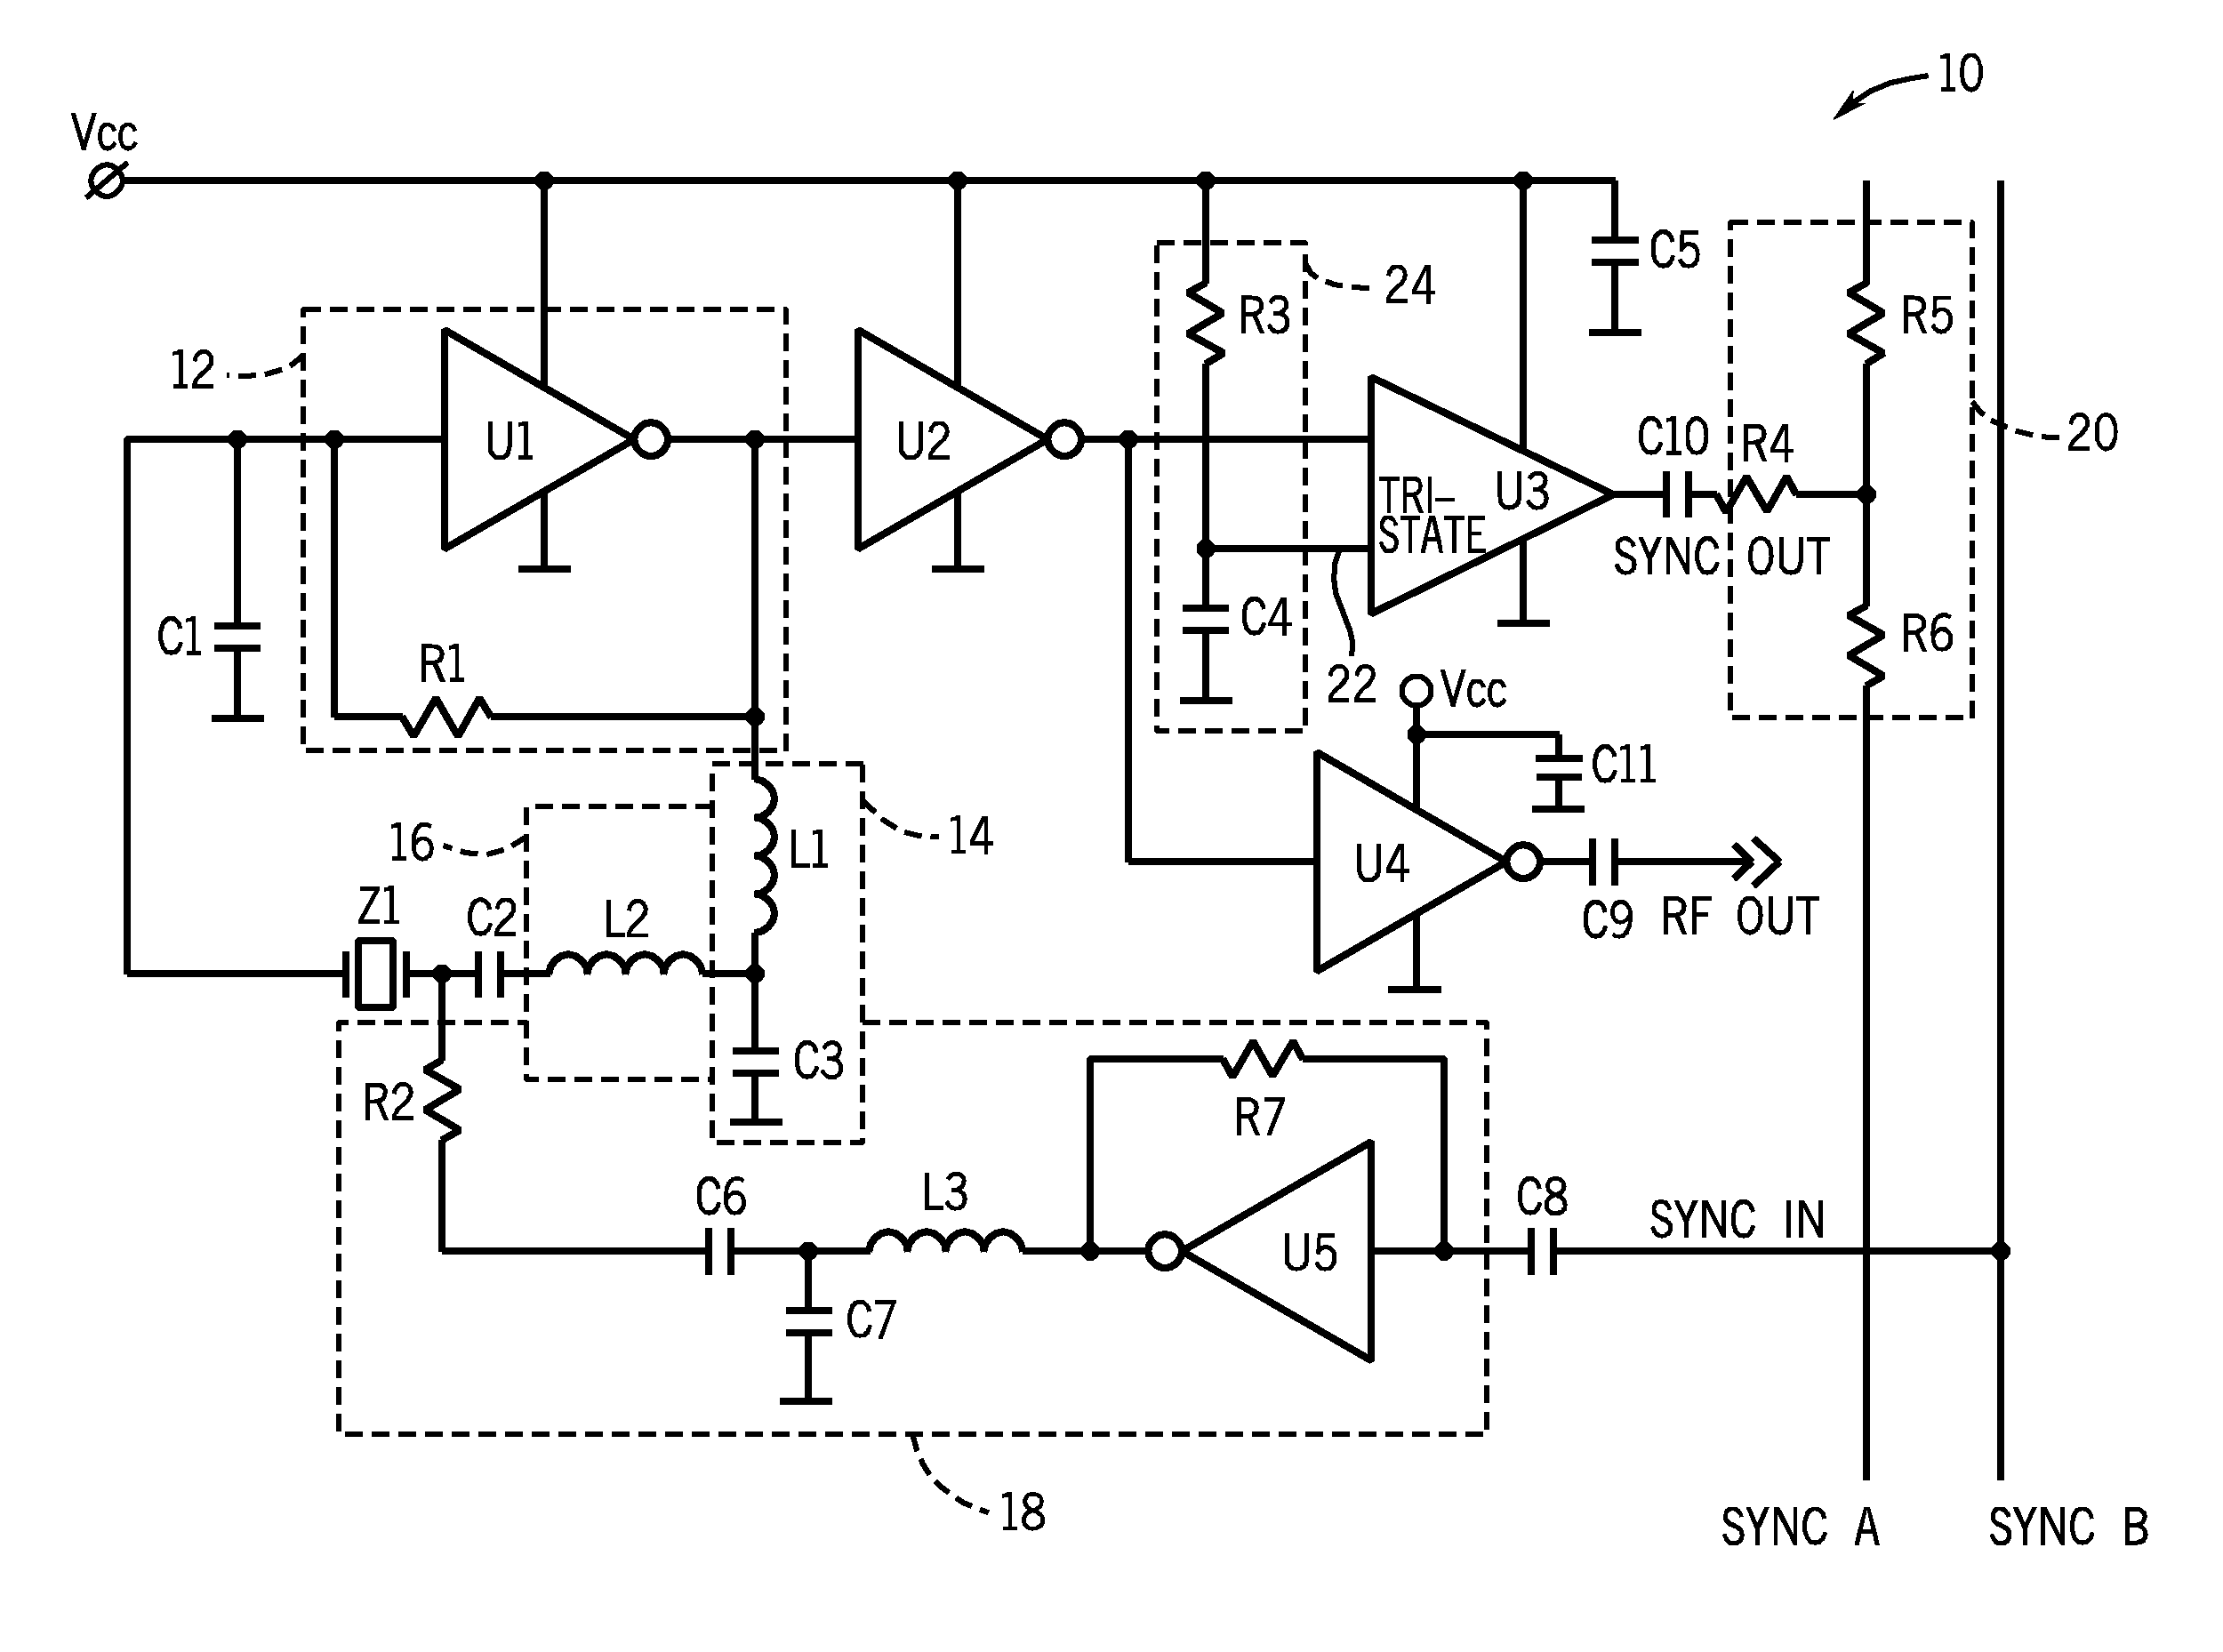 Crystal-based oscillator for use in synchronized system